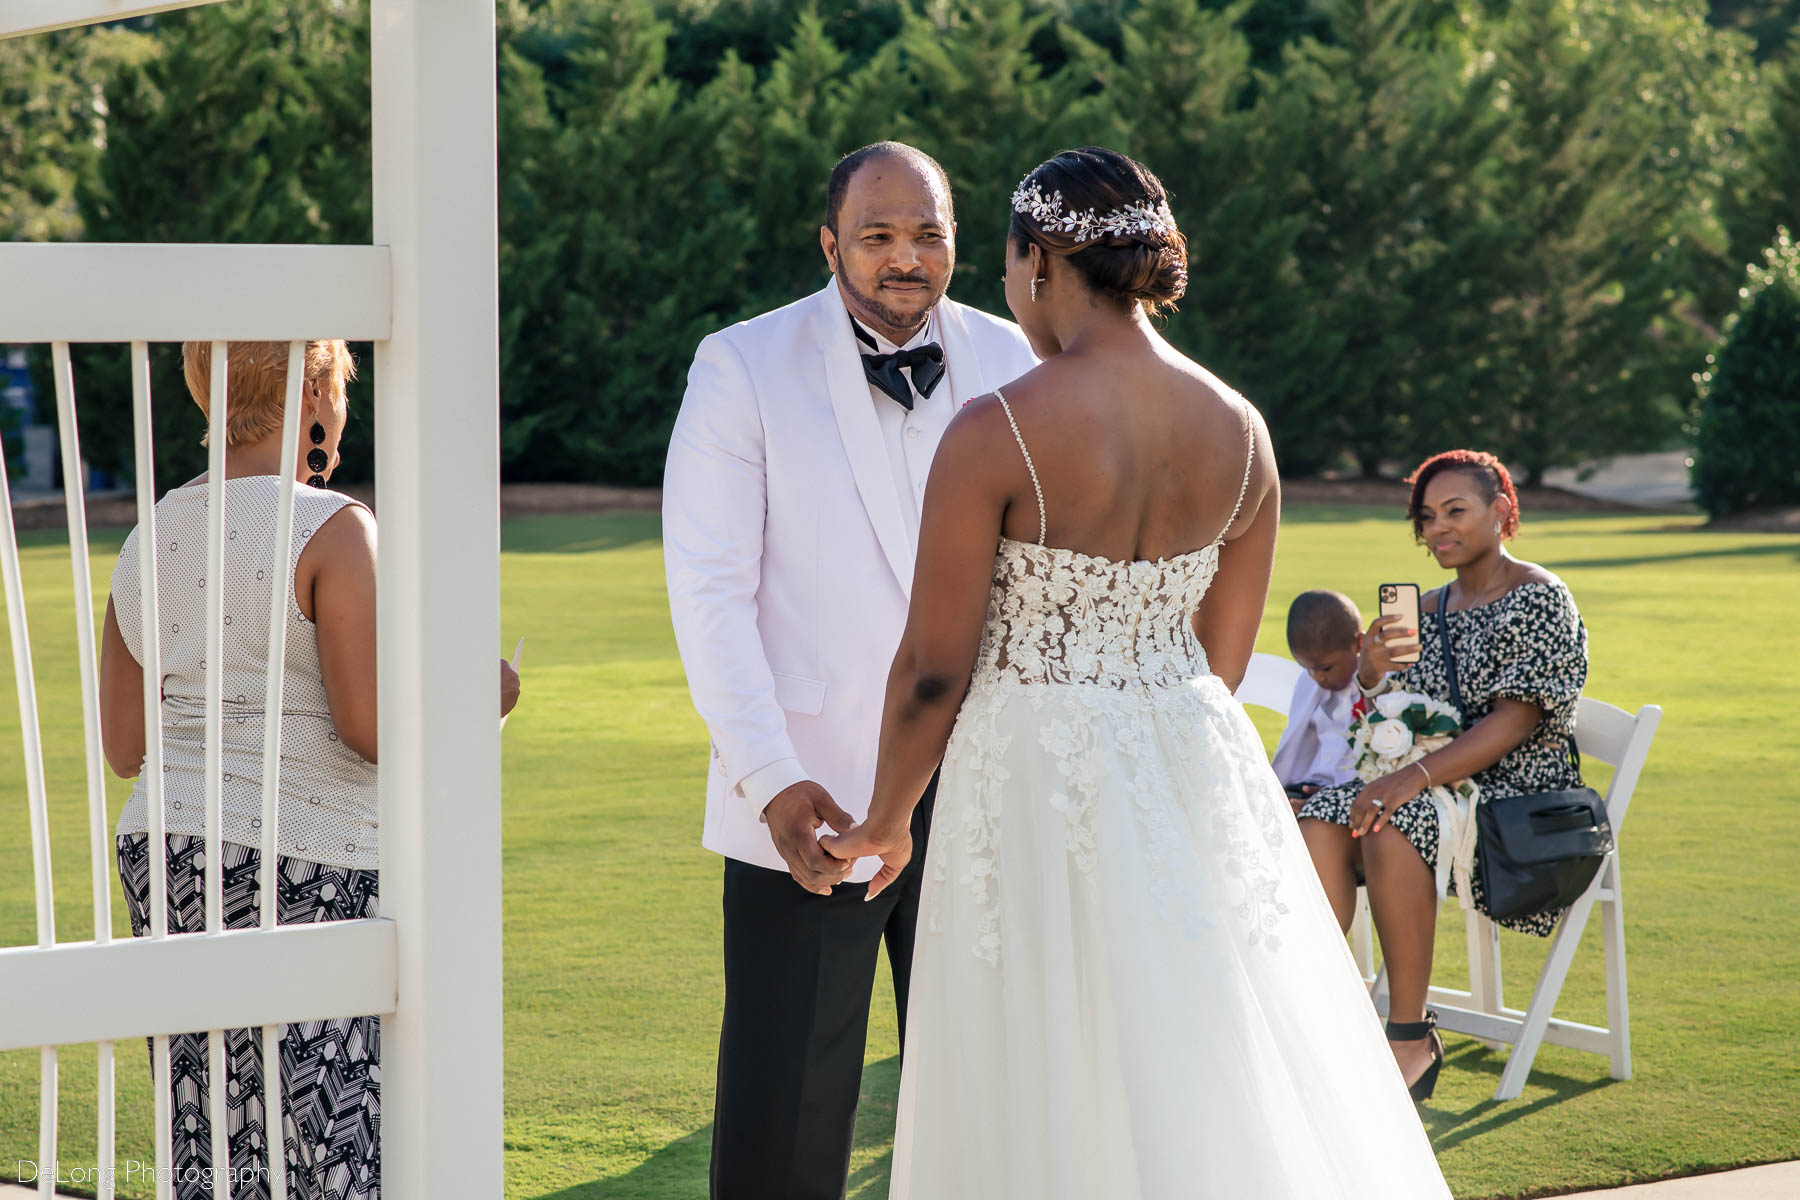 The groom smiling at his bride during their elopement ceremony at Providence Country Club by Charlotte wedding photographers DeLong Photography